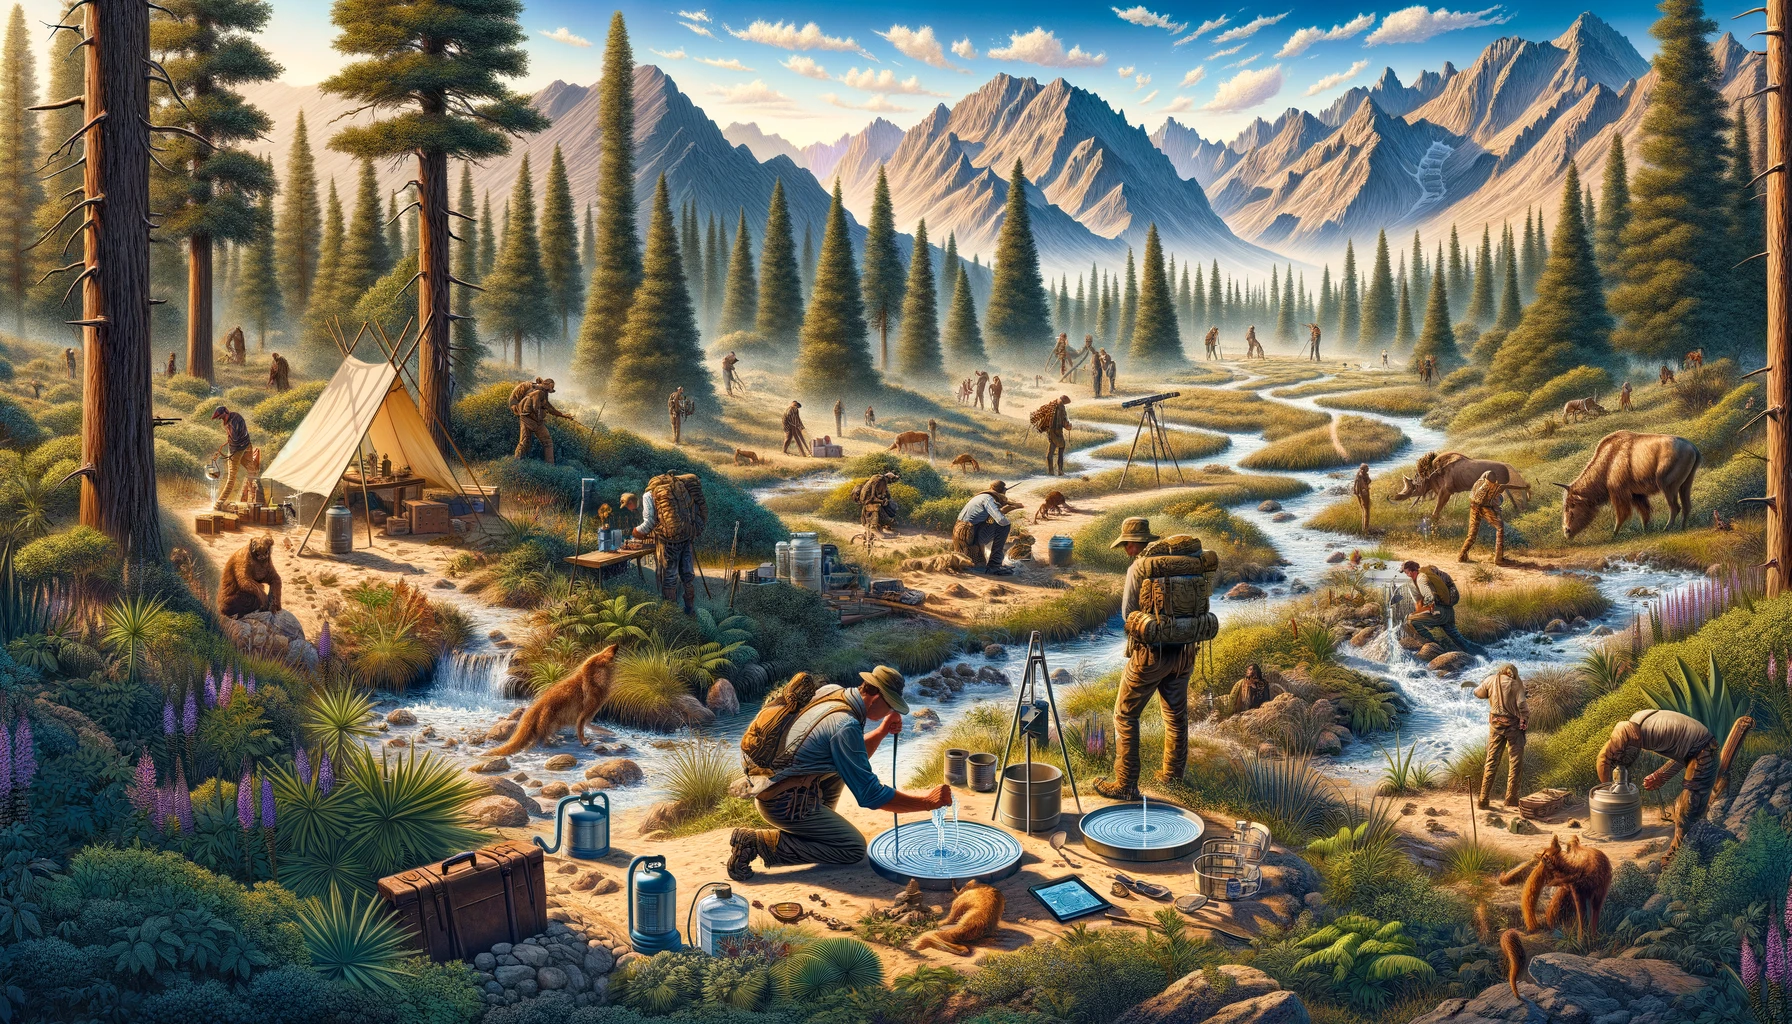 An informative and vivid depiction of individuals using both traditional and modern methods to find water in diverse terrains, including forests, mountains, and deserts. The image highlights survival techniques like following animal tracks, using topographical maps, and constructing solar stills, emphasizing the essential skill of locating water sources for hydration in the wilderness.